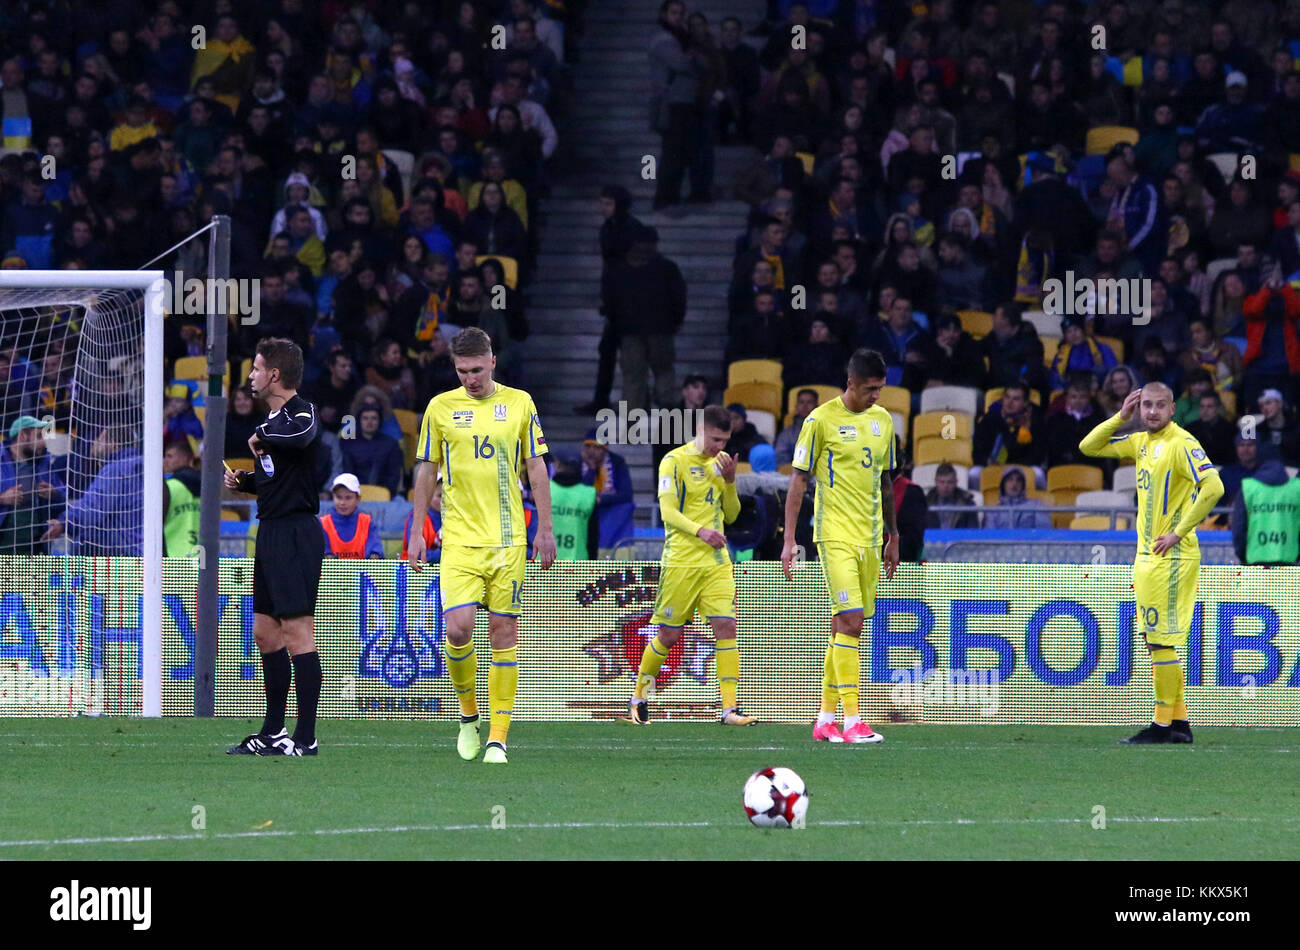 KYIV, UKRAINE - OCTOBER 9, 2017: Ukrainian footballers react after missed a goal during FIFA World Cup 2018 qualifying game against Croatia at NSC Oli Stock Photo